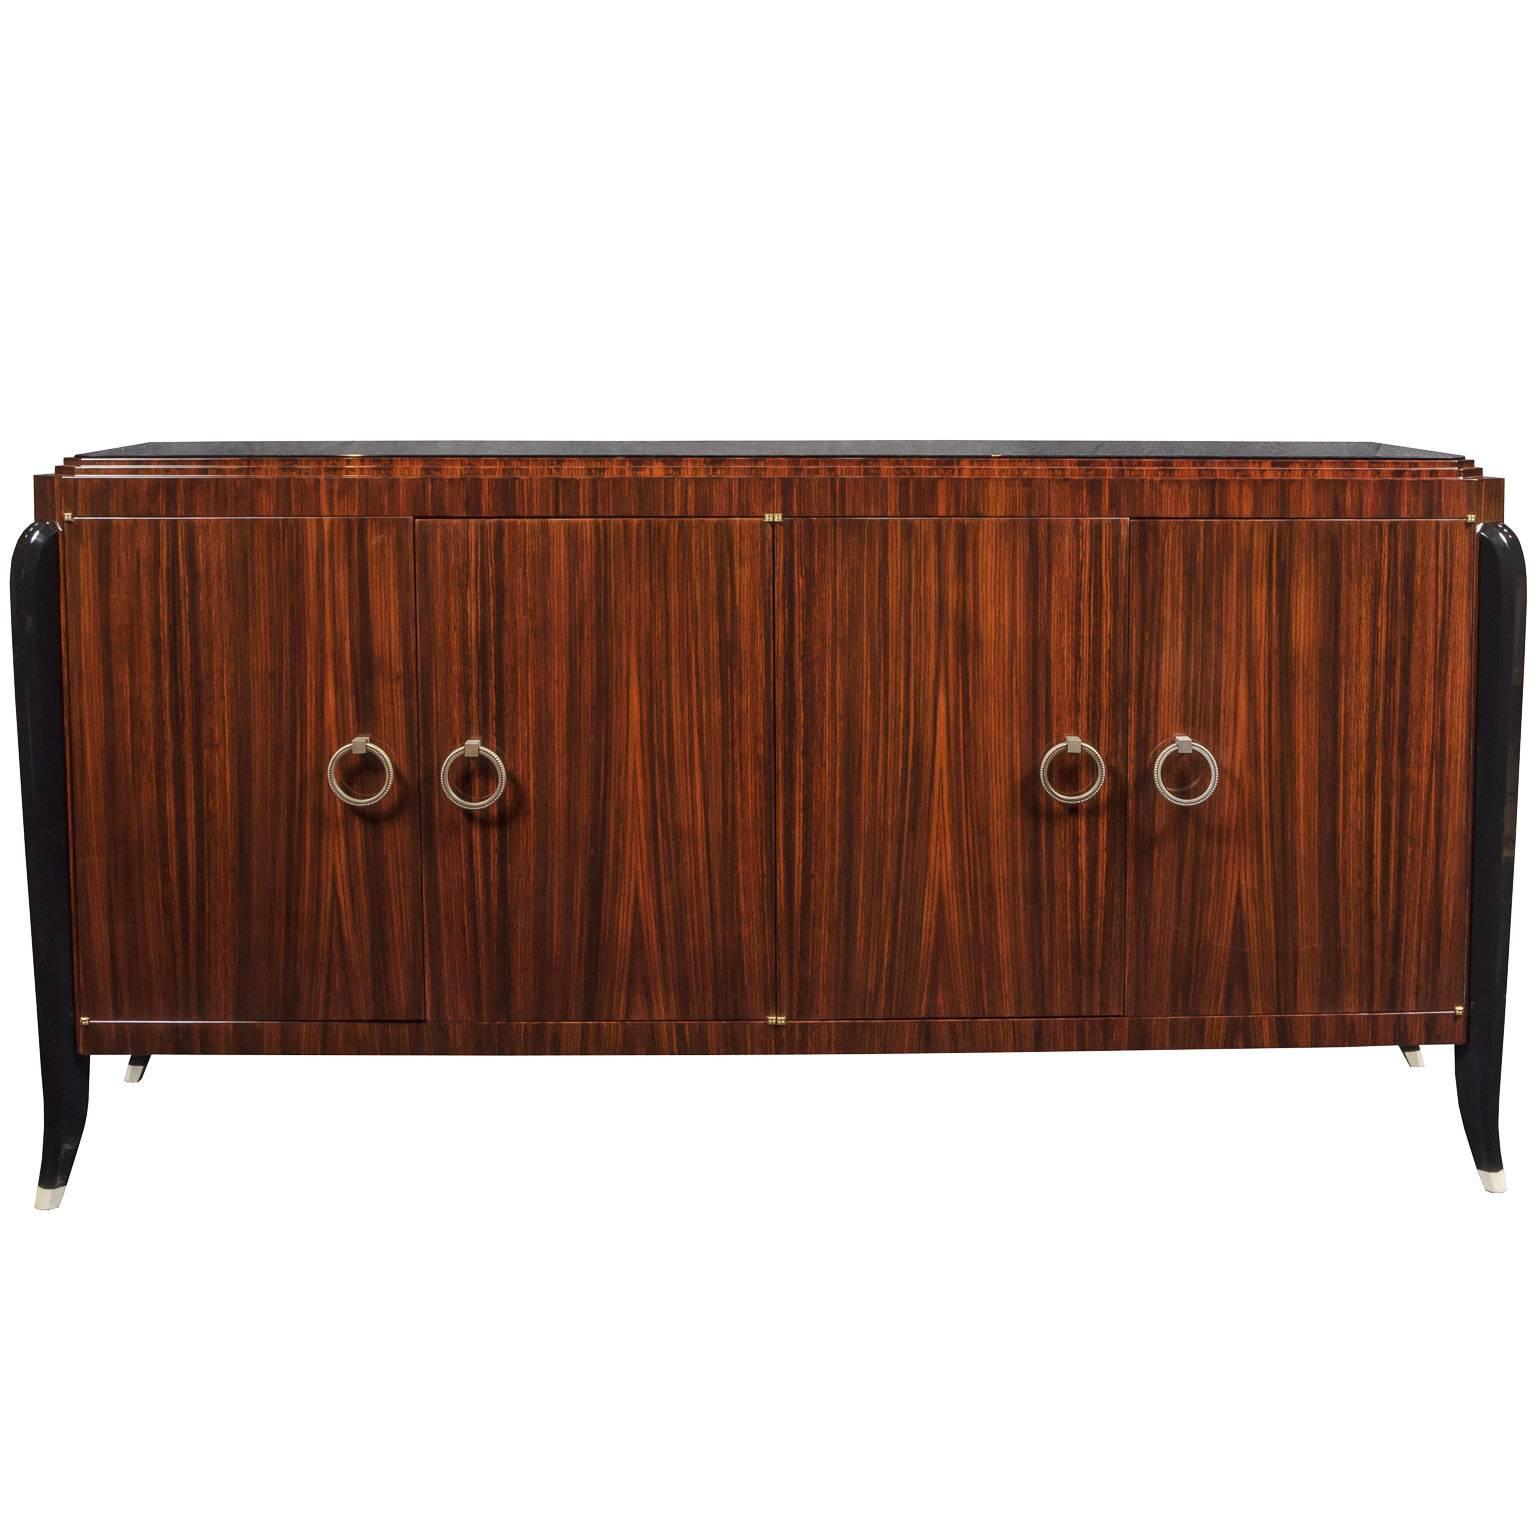 Art Deco Inspired Indian Rosewood Sideboard For Sale